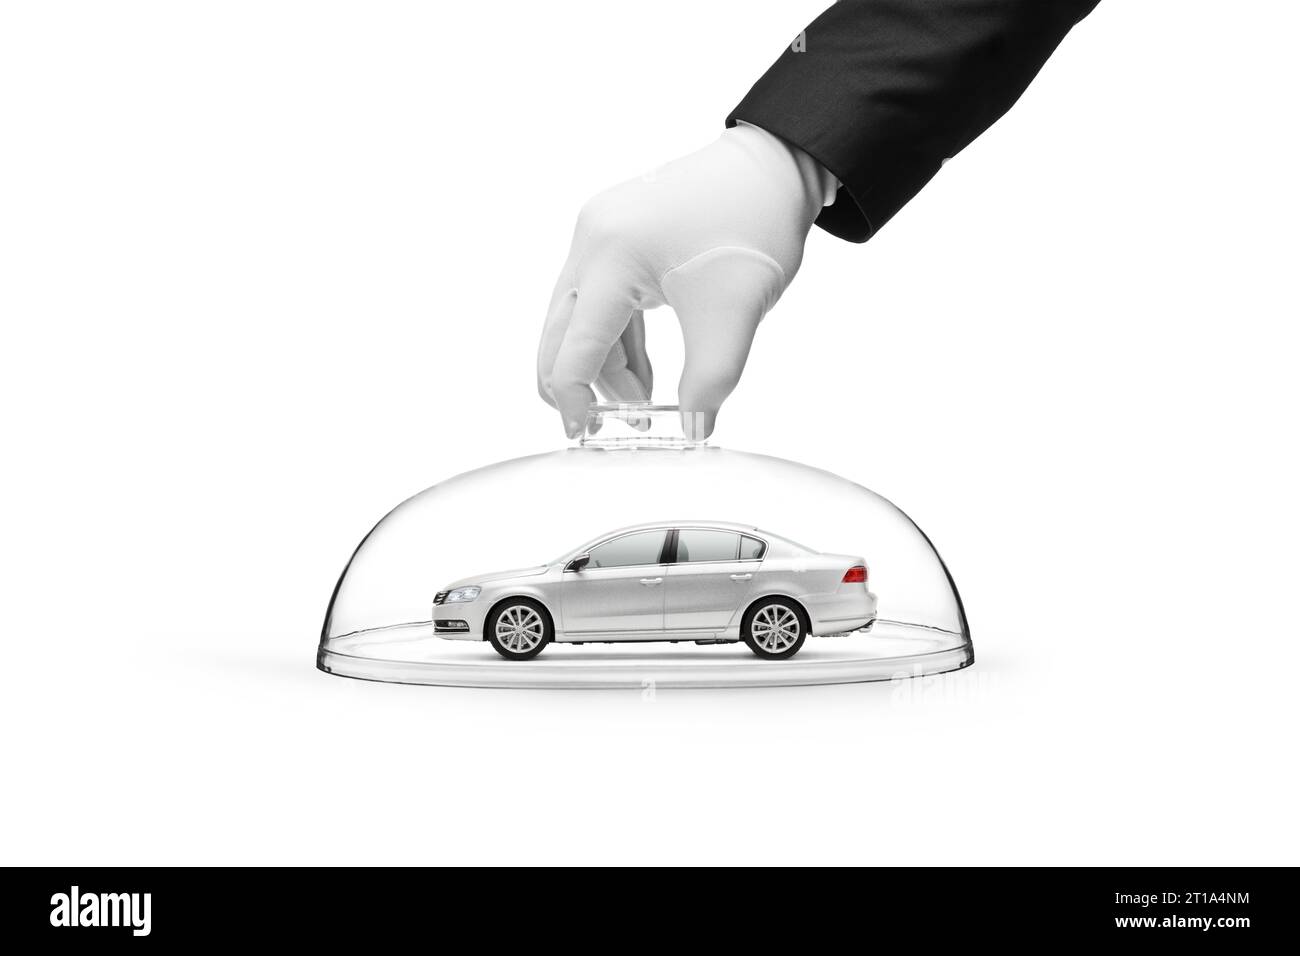 A gloved hand holding a glass dome over a car symbolizing car security and car insurance concept isolated on white background Stock Photo